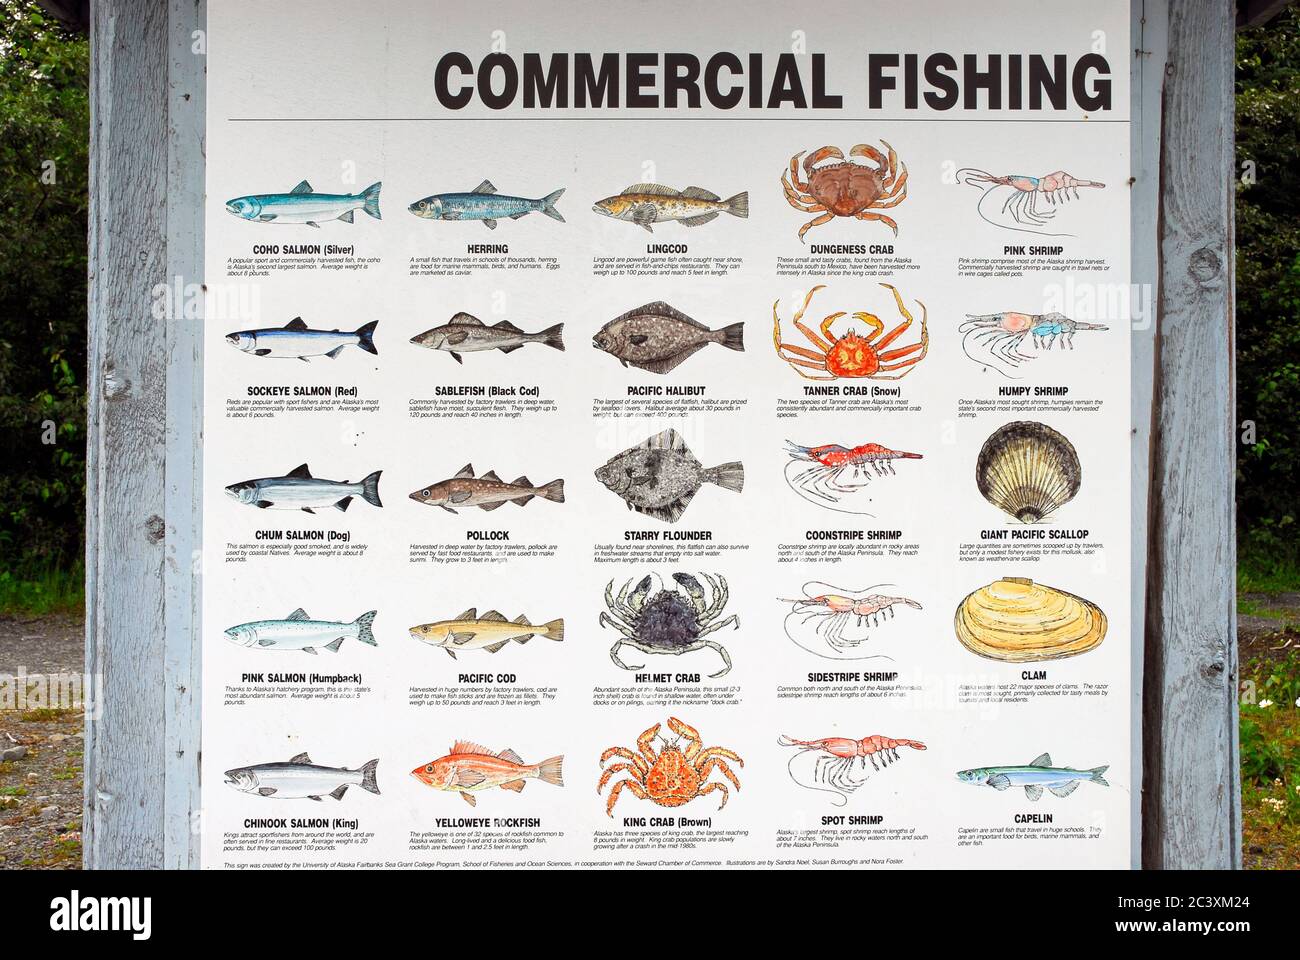 Commercial fishing list in the Pacific Ocean Stock Photo